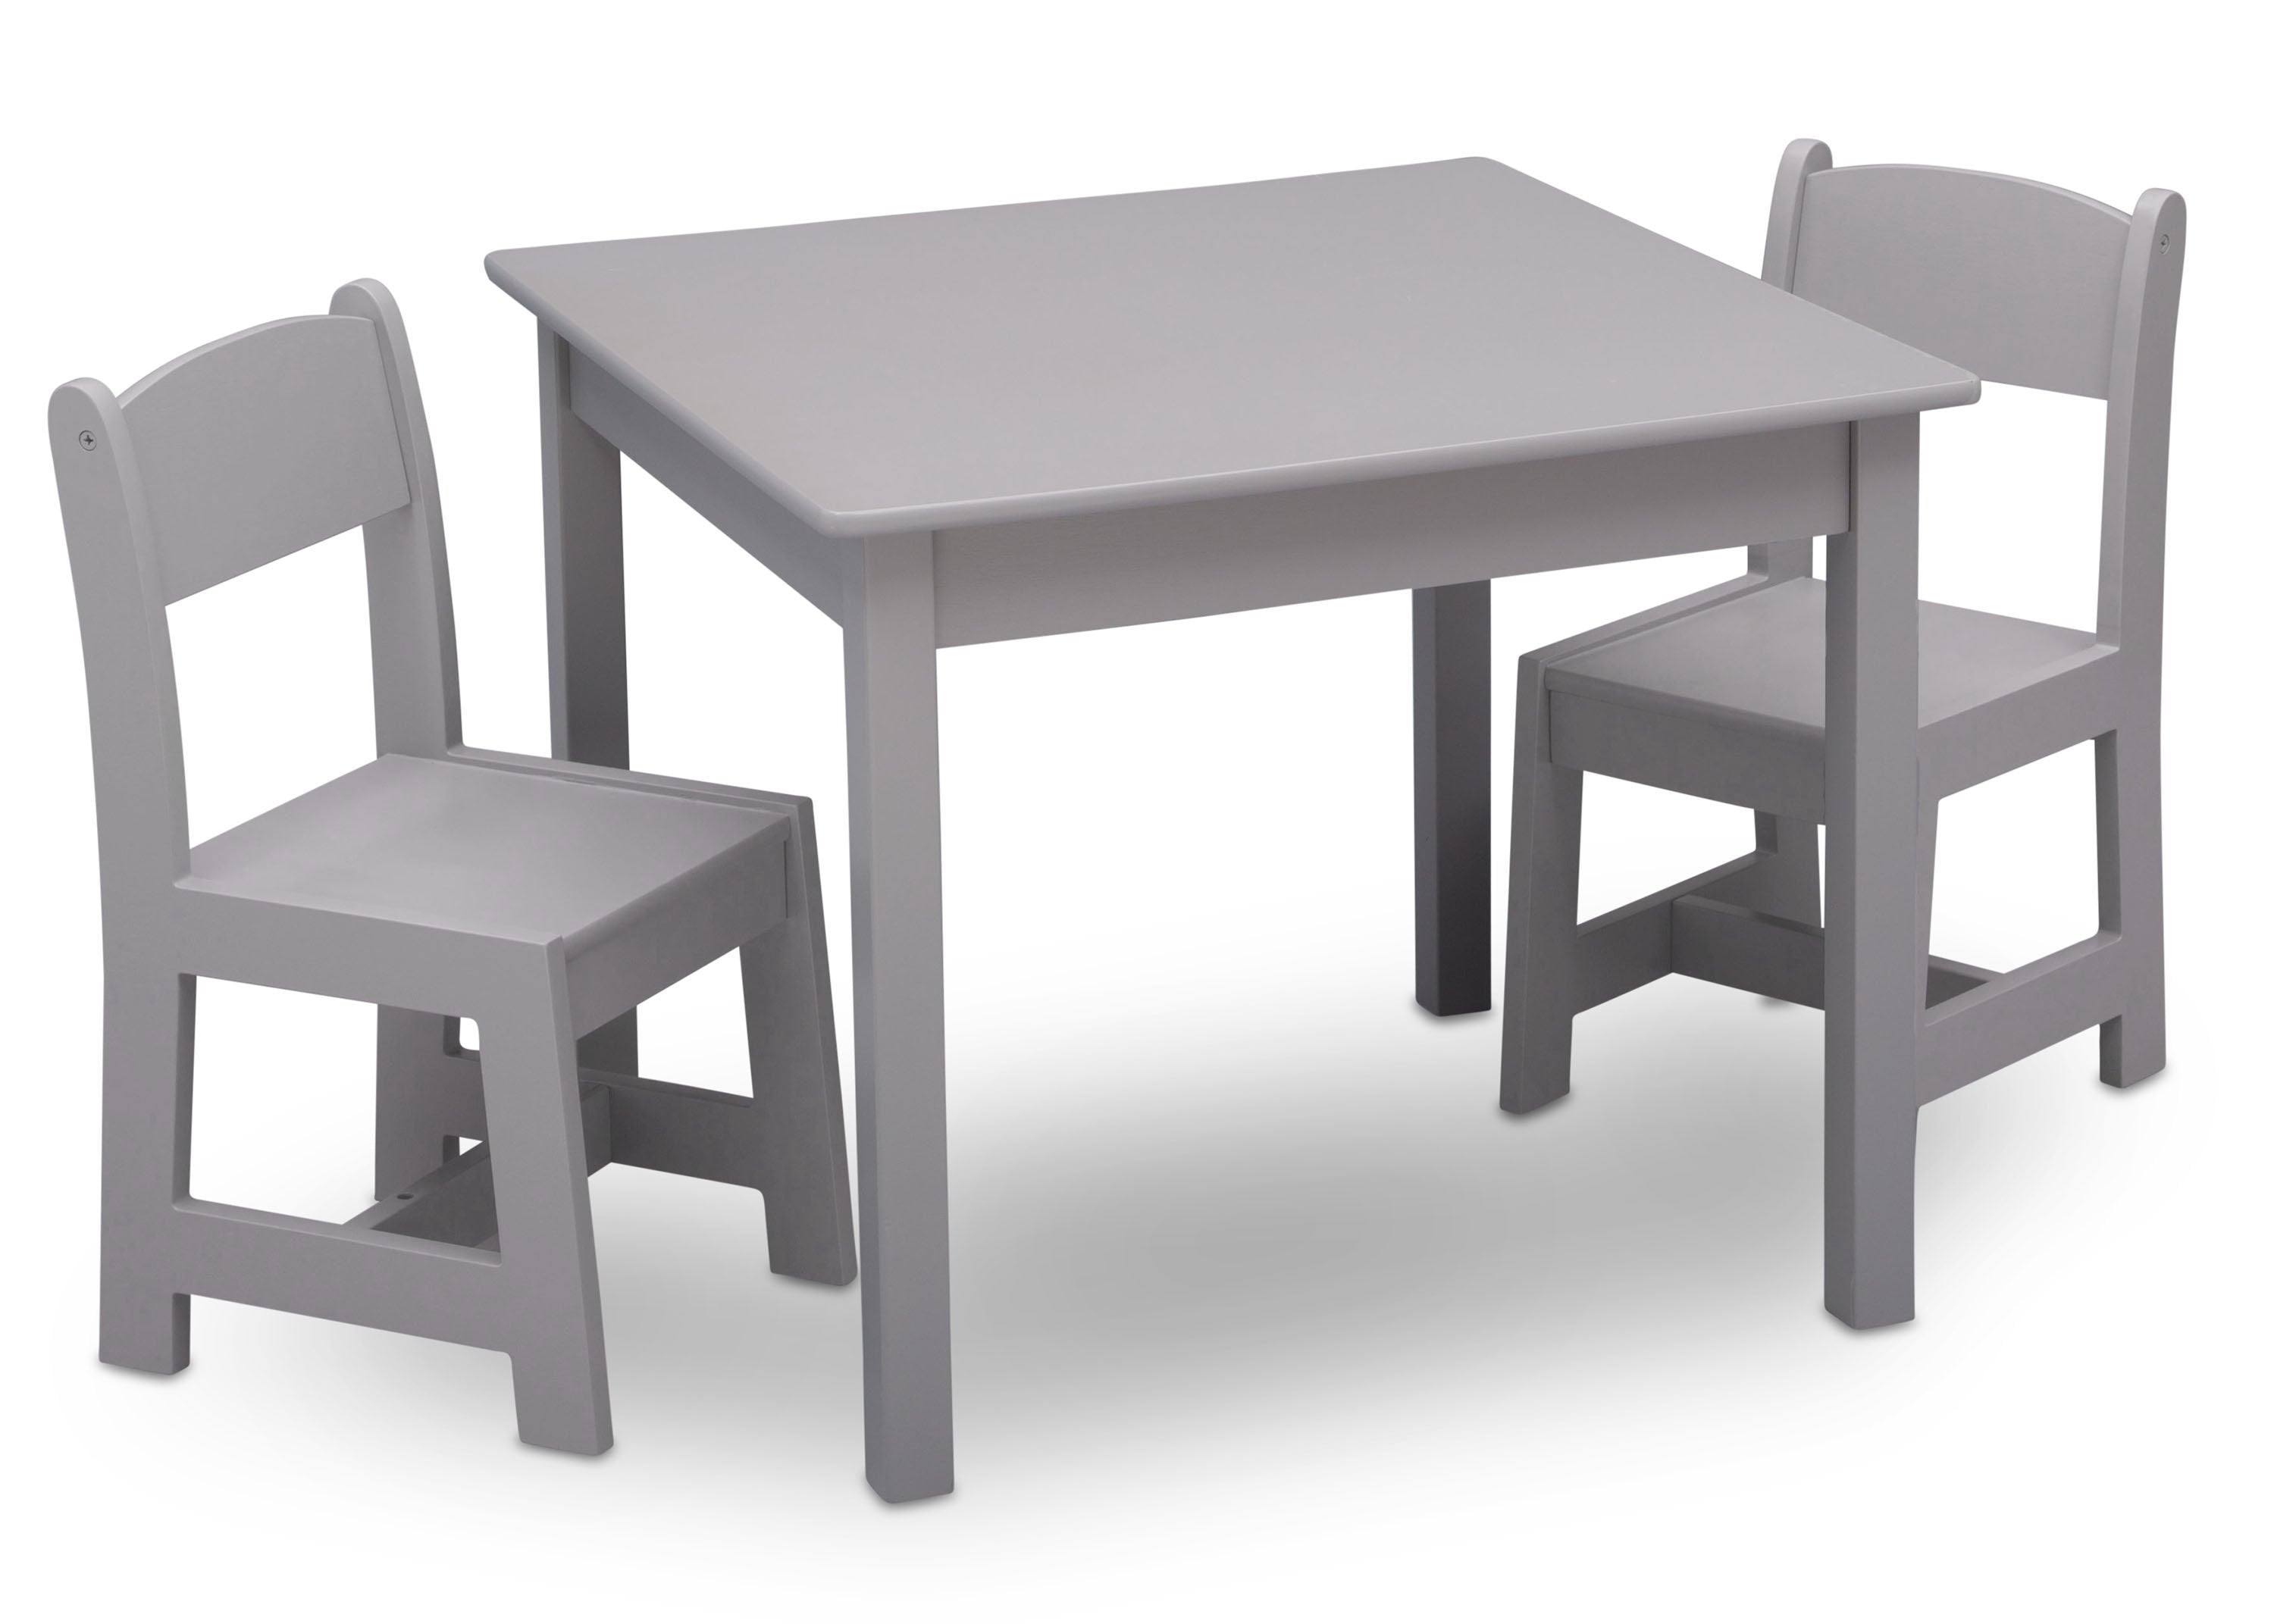 The office that's all suffer MySize Toddler Table & Chairs Set | Delta Children